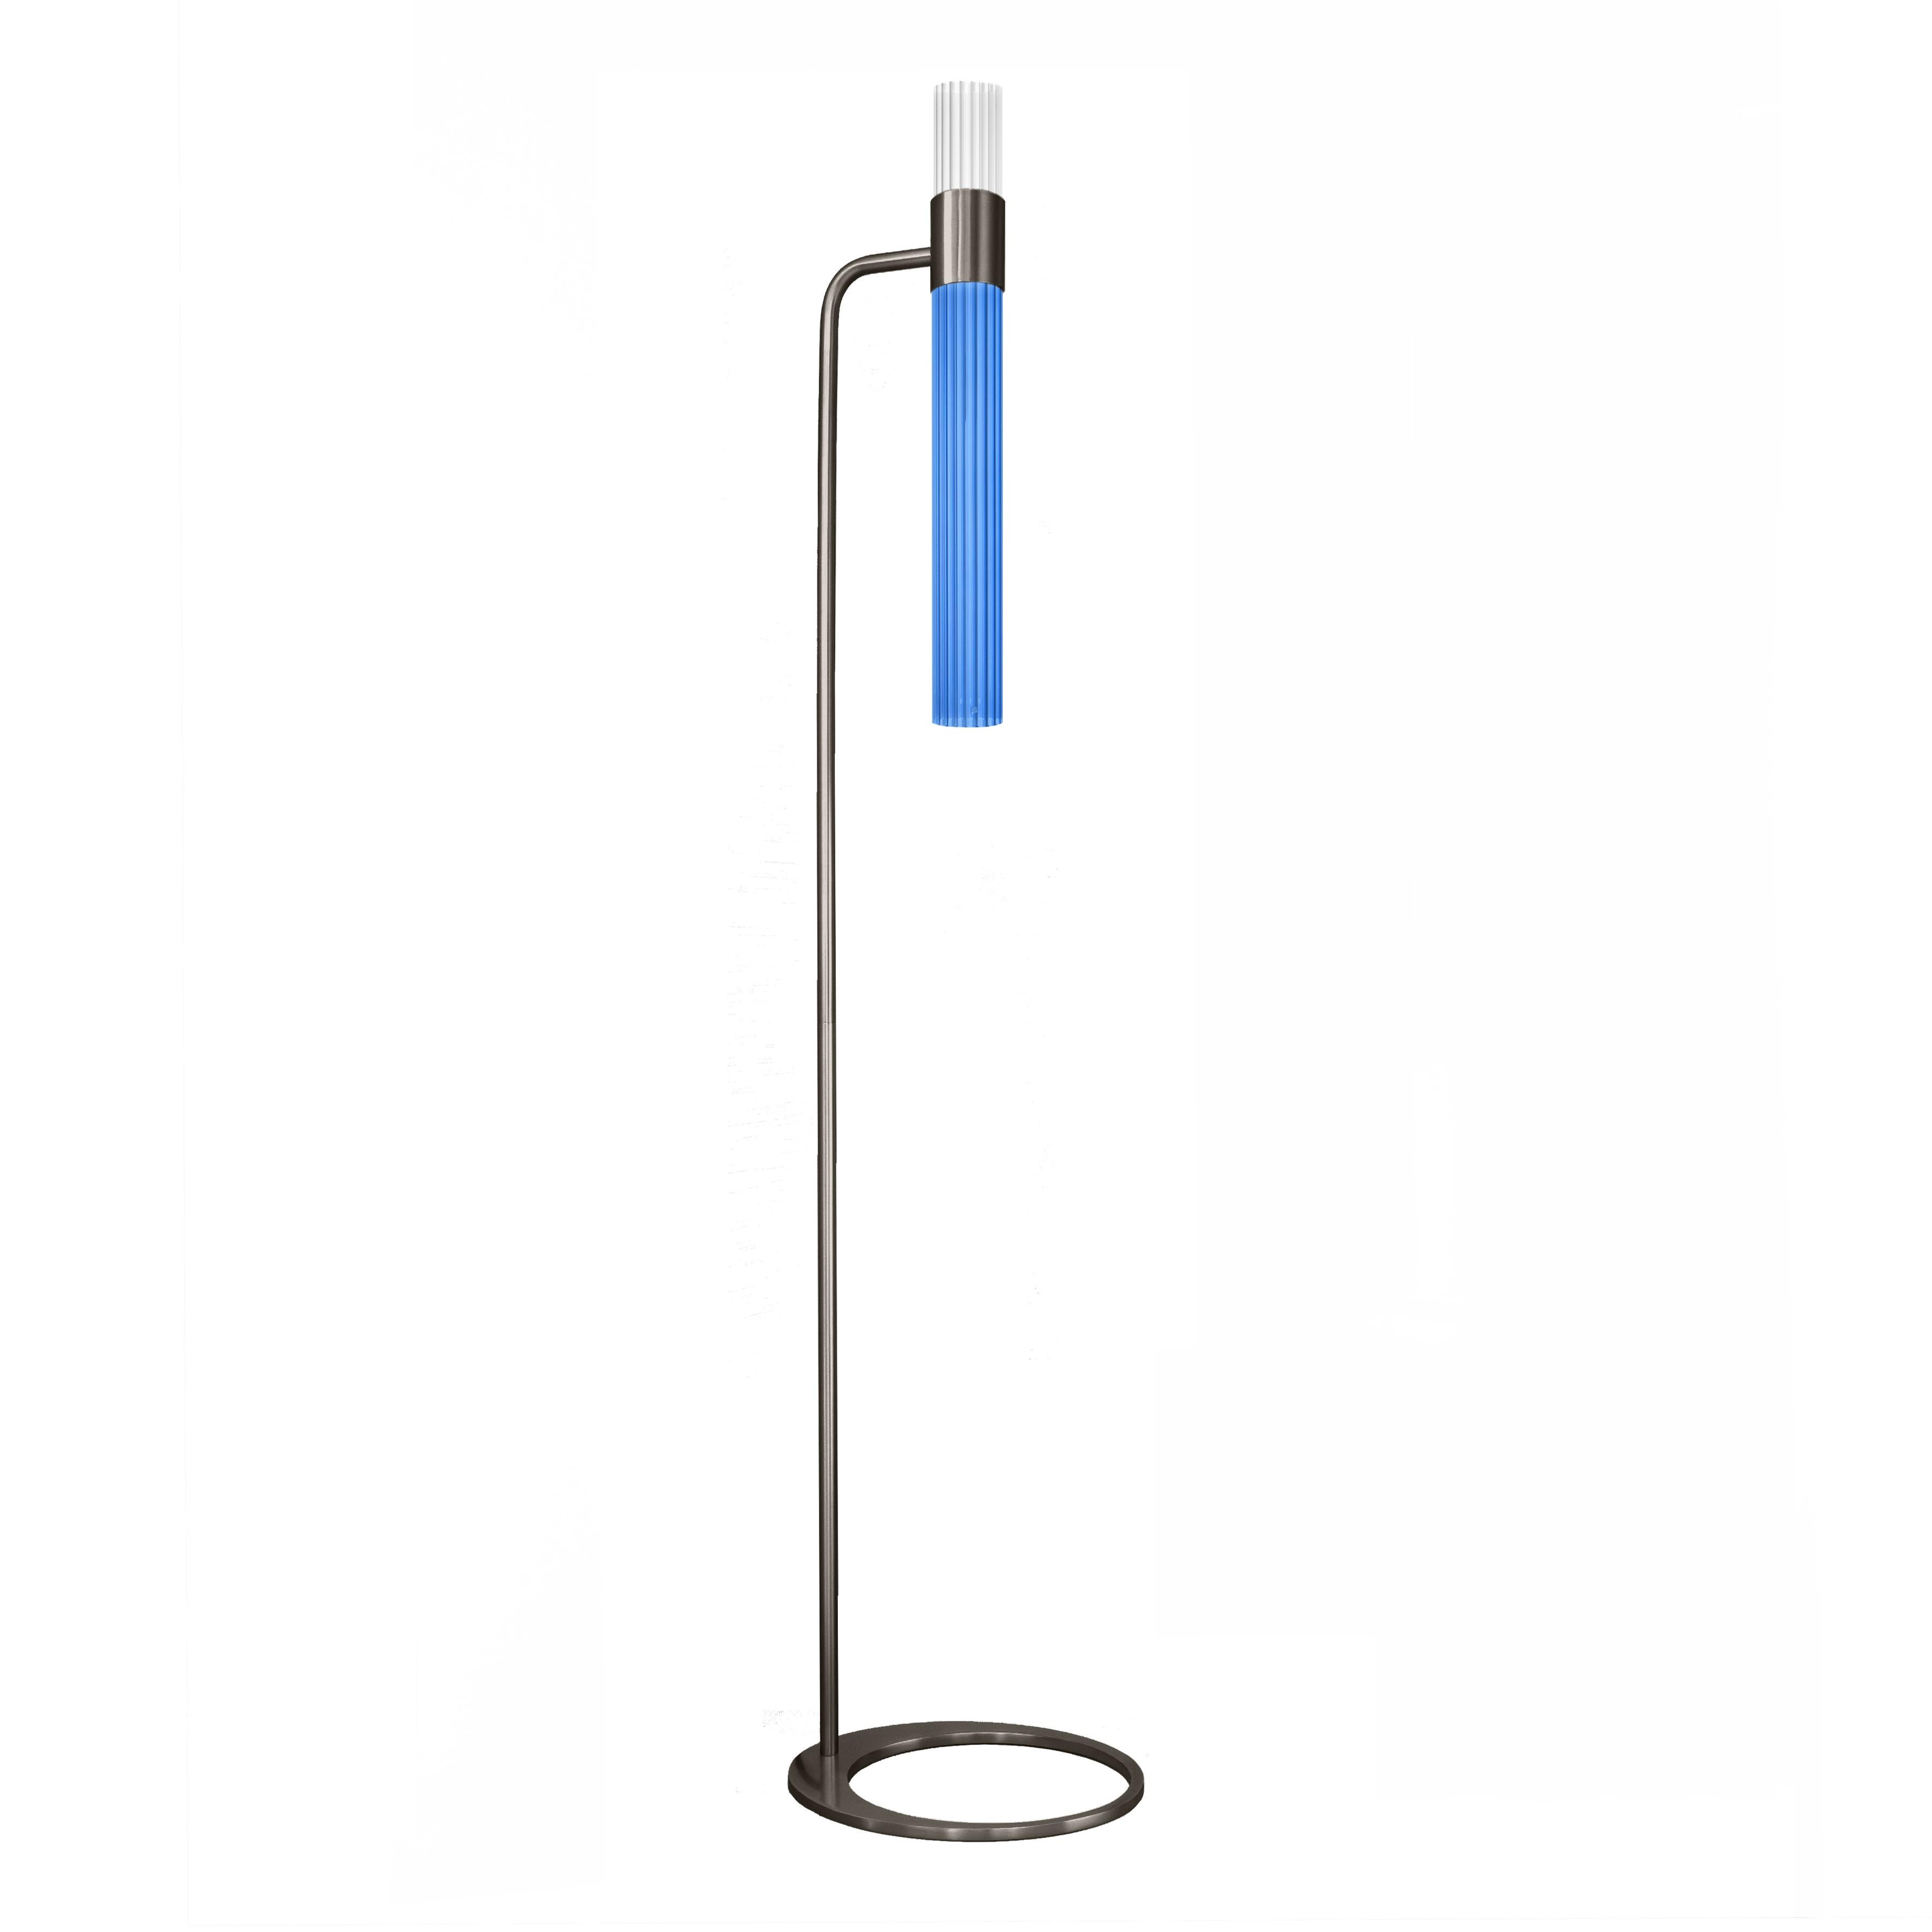 Sbarlusc floor lamp by LUCE TU.
Dimensions: 149 x 32.5 cm
Materials: Brass and glass

Sbarlusc in Milanese dialect represents the sparkle of a precious and very bright object. The colored glasses, which combine with each other creating games of